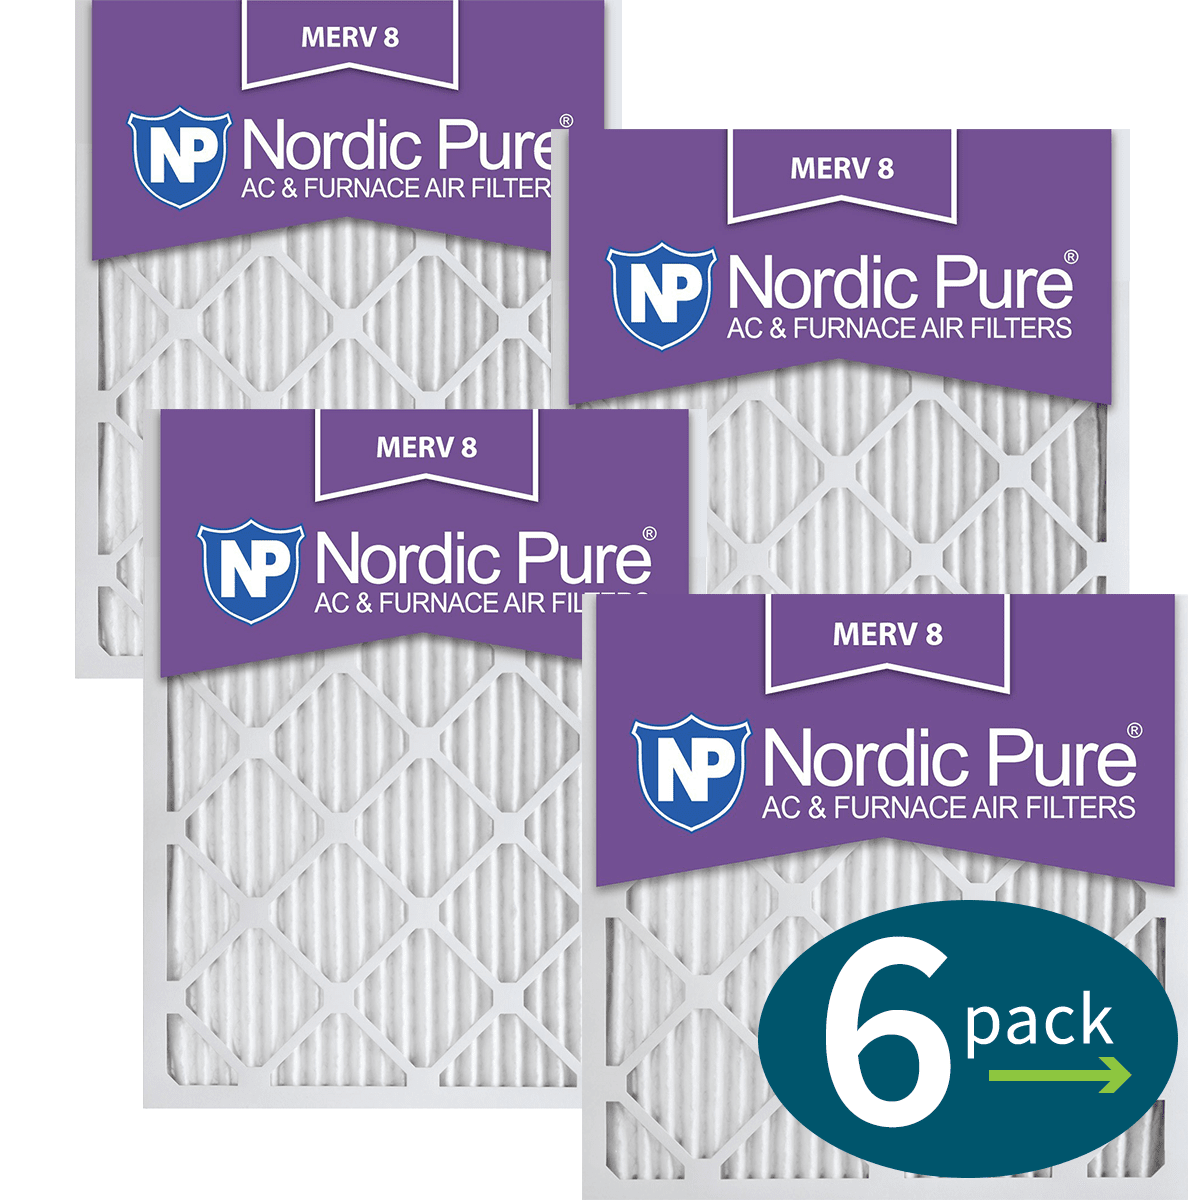 Nordic Pure Merv 8 1-in. Pleated Furnace Filters (6 Pack)